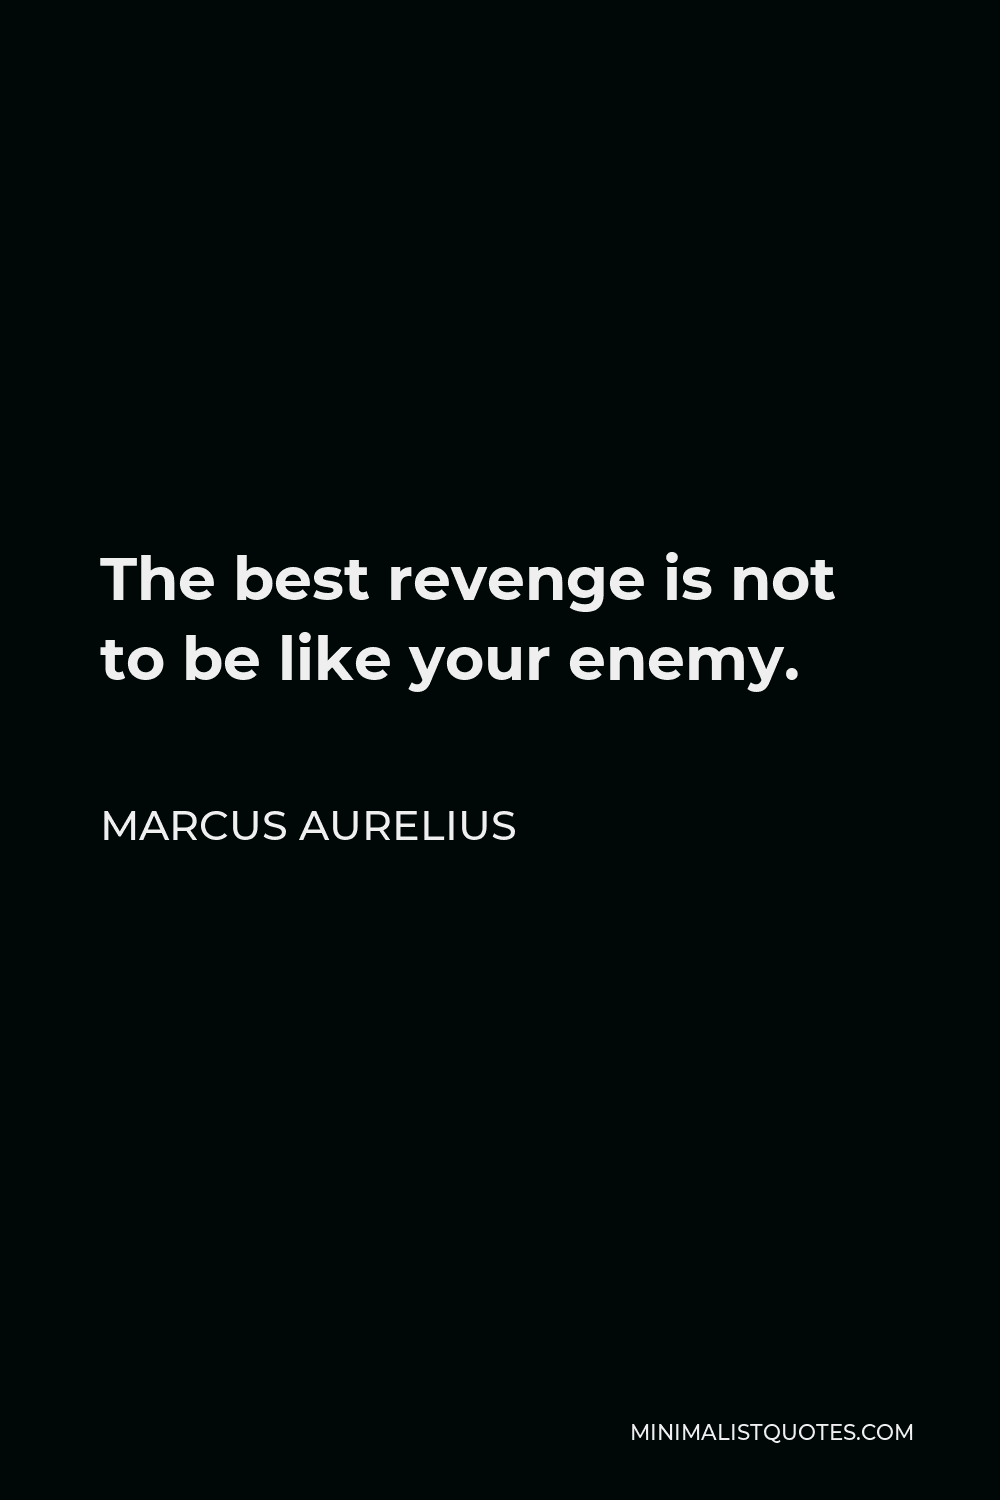 Marcus Aurelius Quote - The best revenge is not to be like your enemy.